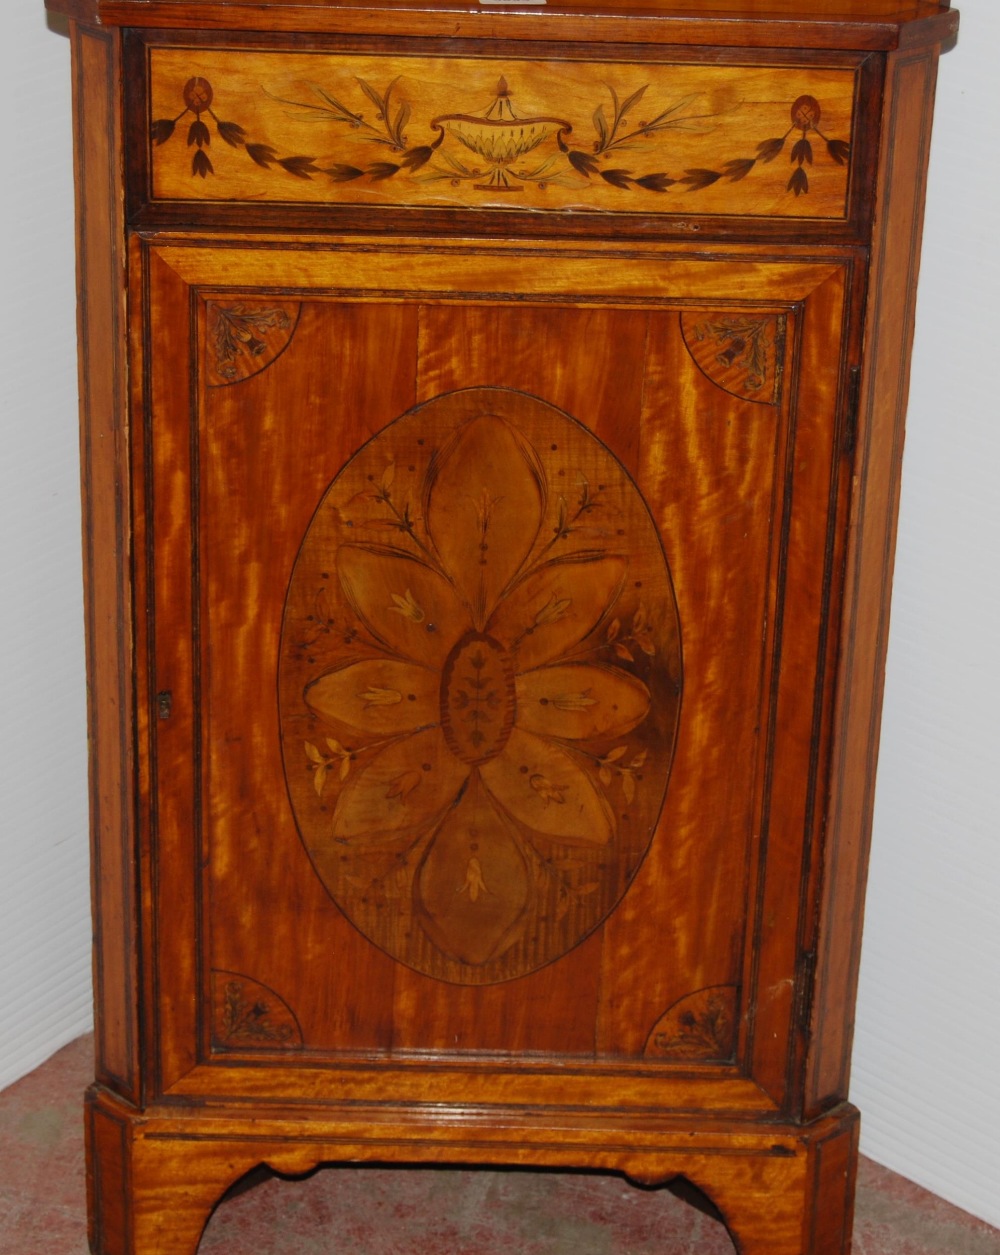 19th century inlaid satinwood corner cabinet, inlaid with urns and foliage, 90cm high and 53cm wide. - Image 2 of 6